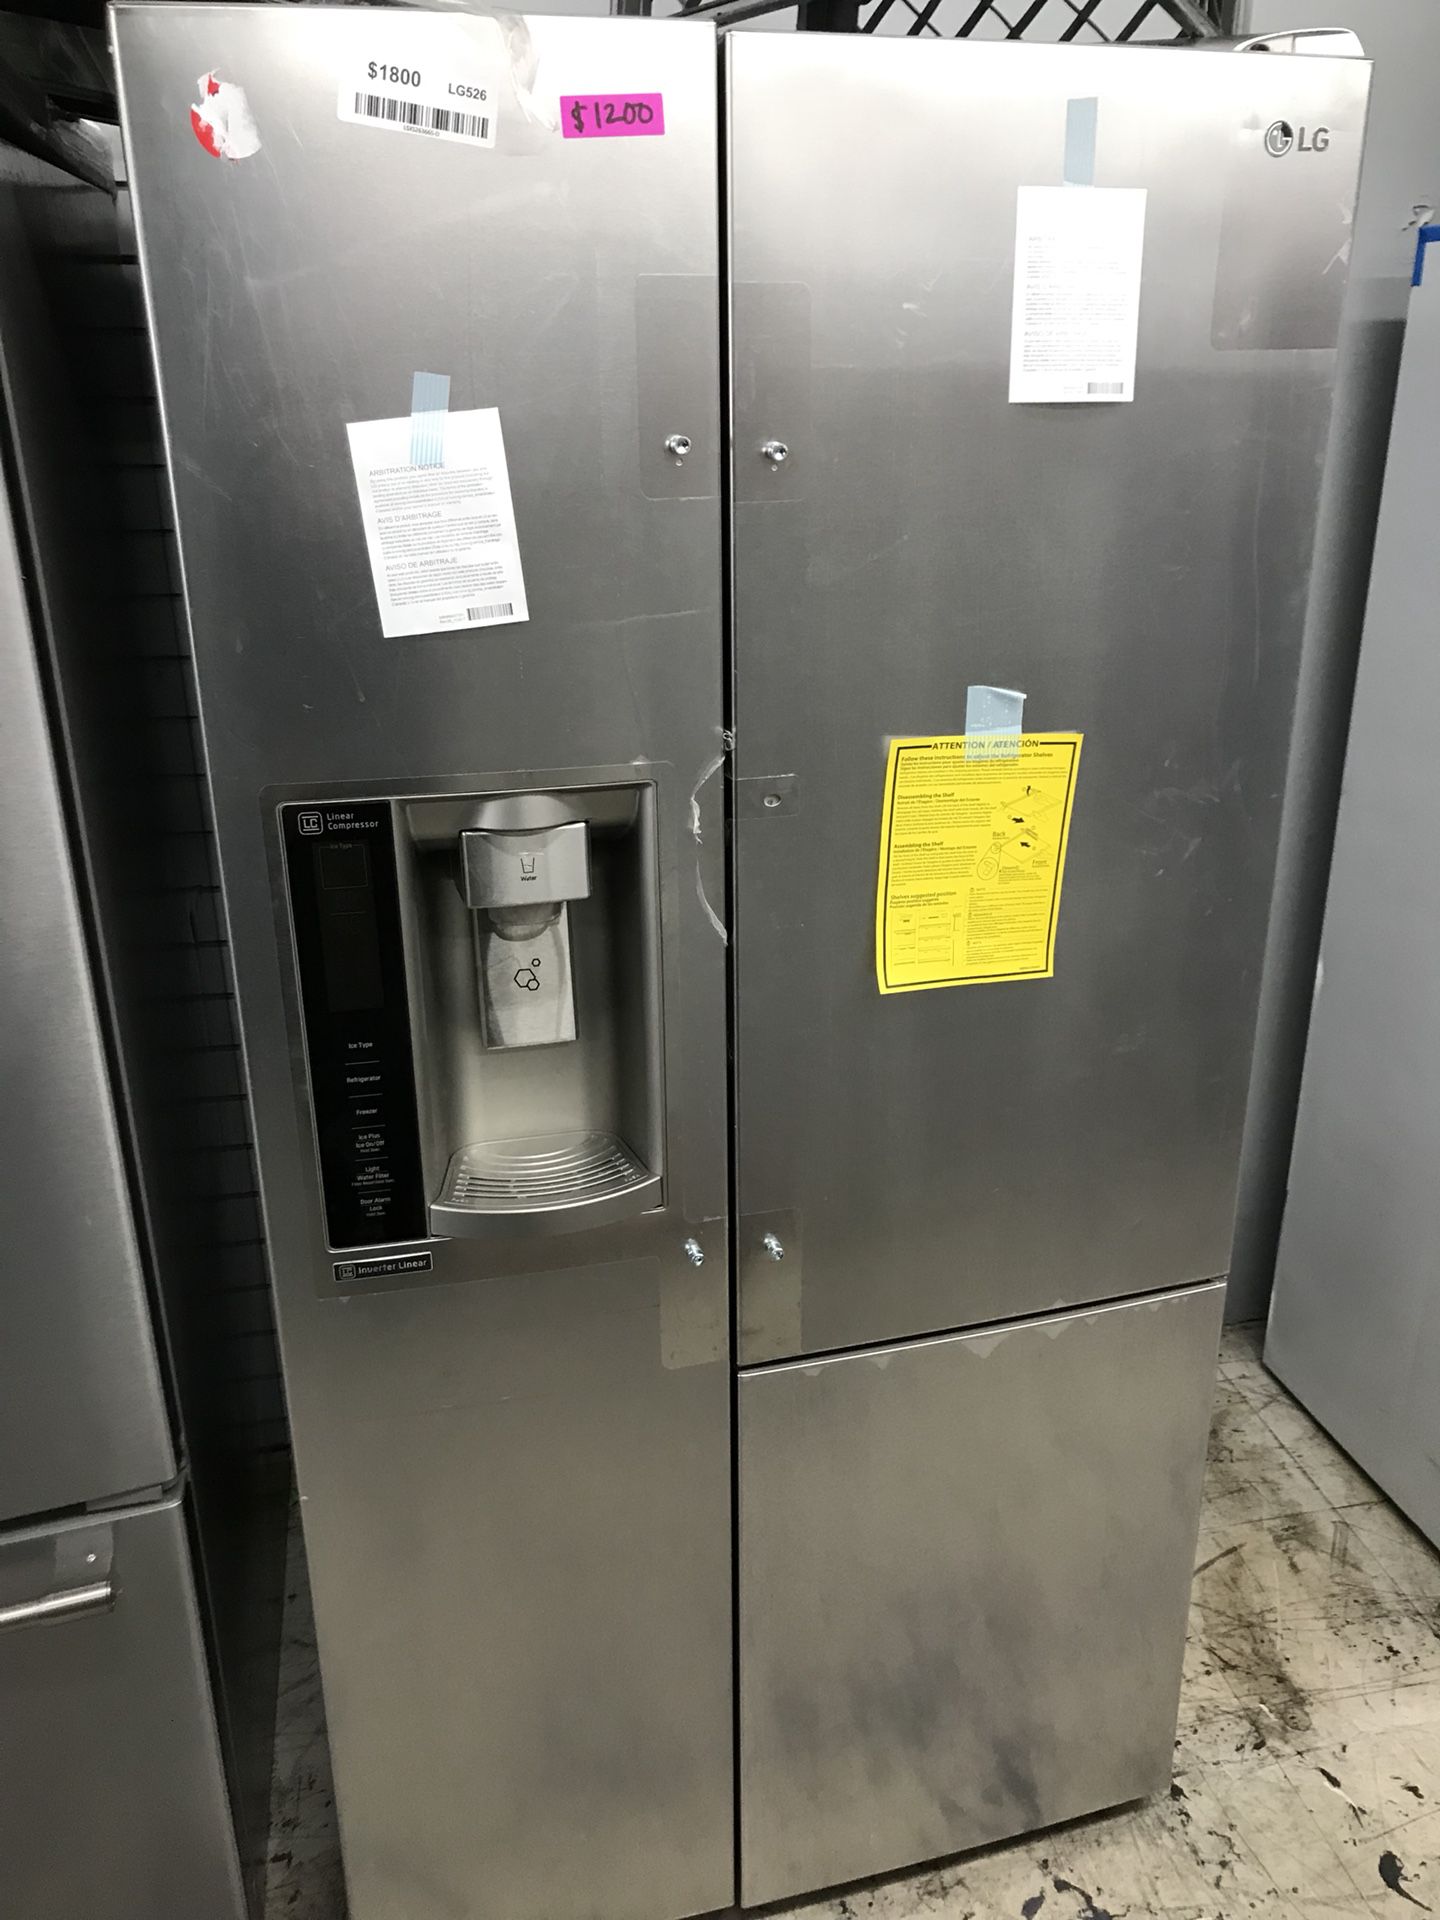 LG stainless steel food showcase side by side refrigerator